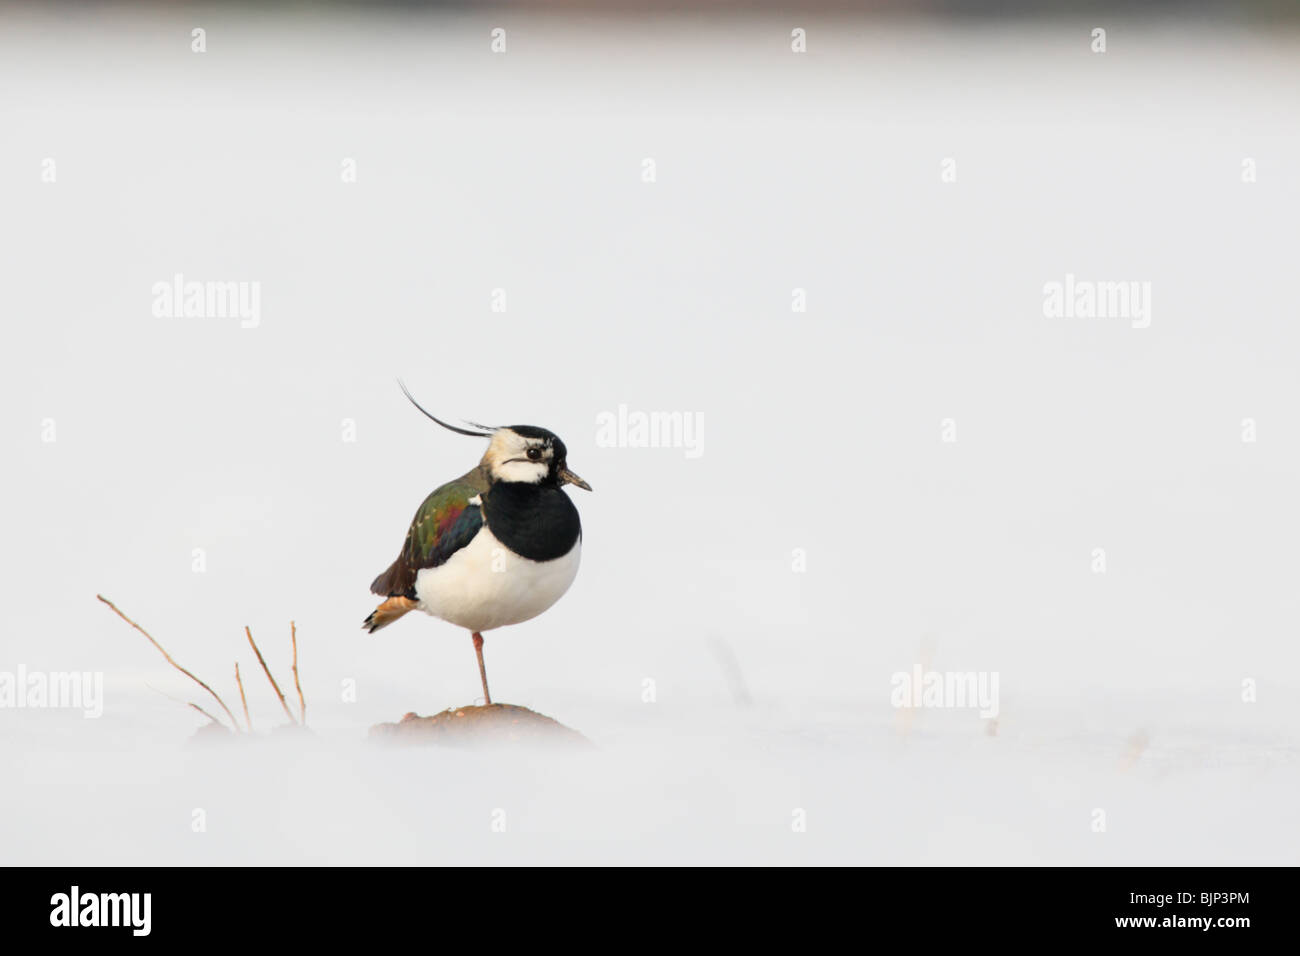 Northern Lapwing (Vanellus vanellus) standing among snow, March 2010 Stock Photo